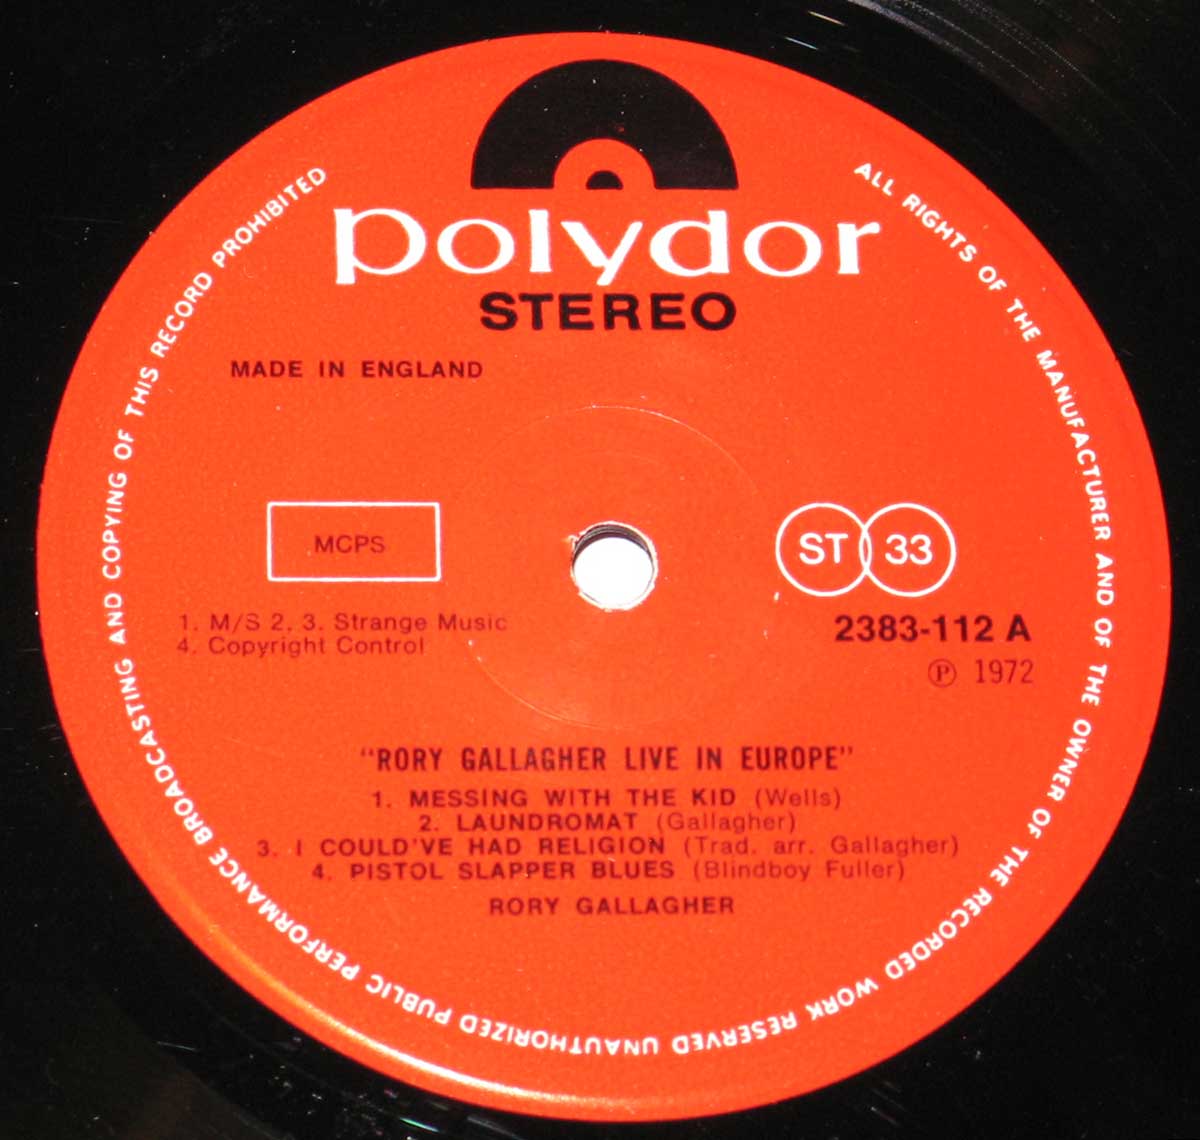 Close-up of the Polydor 2383-112 Record Label 